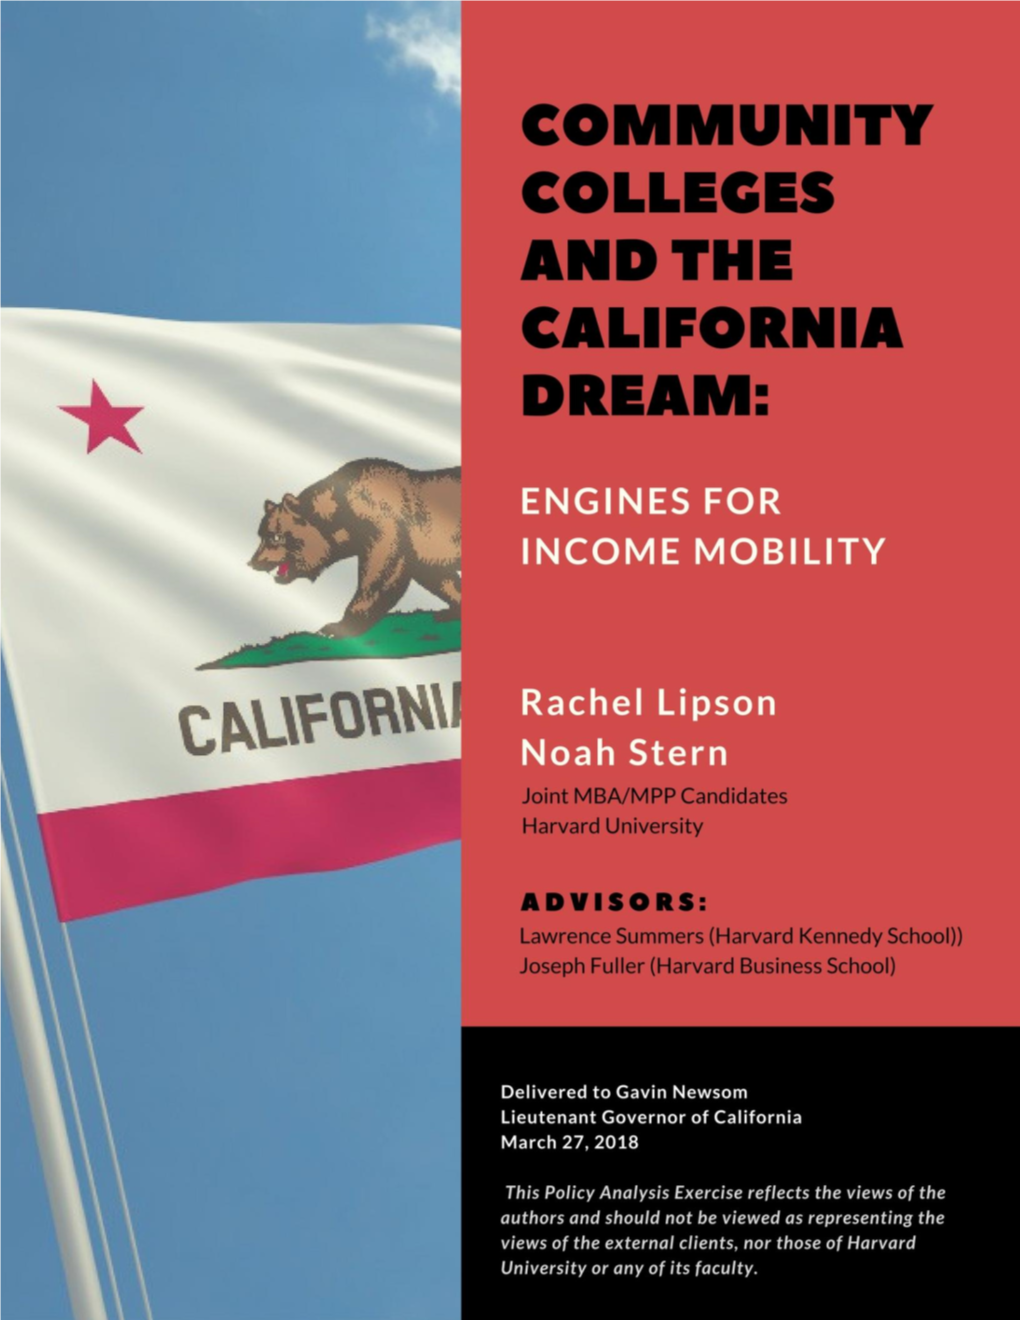 Community Colleges and the California Dream: Engines for Income Mobility